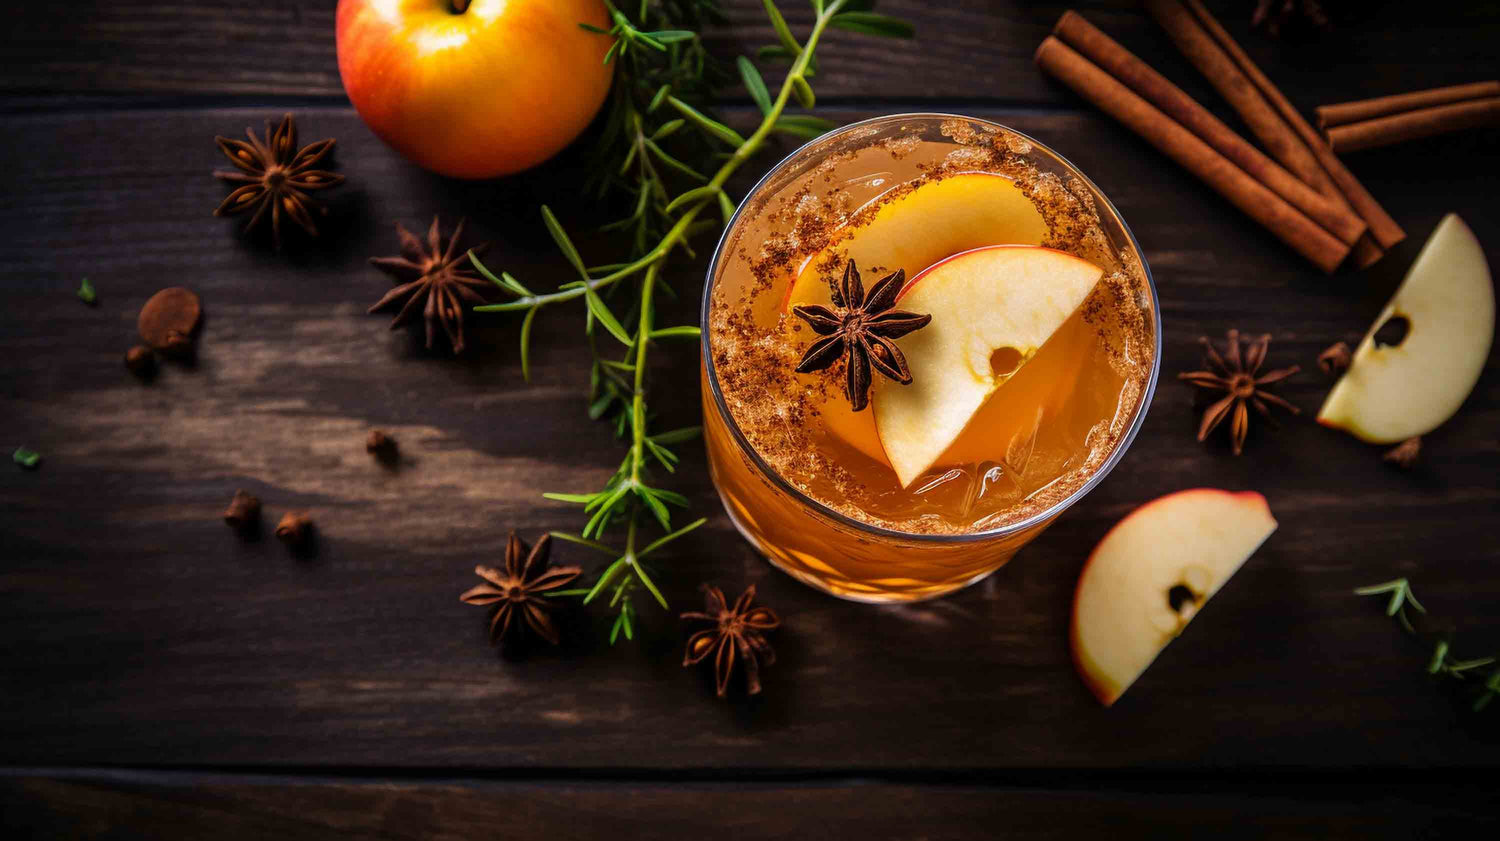 Sip the Season: Healthy Holiday Cocktails